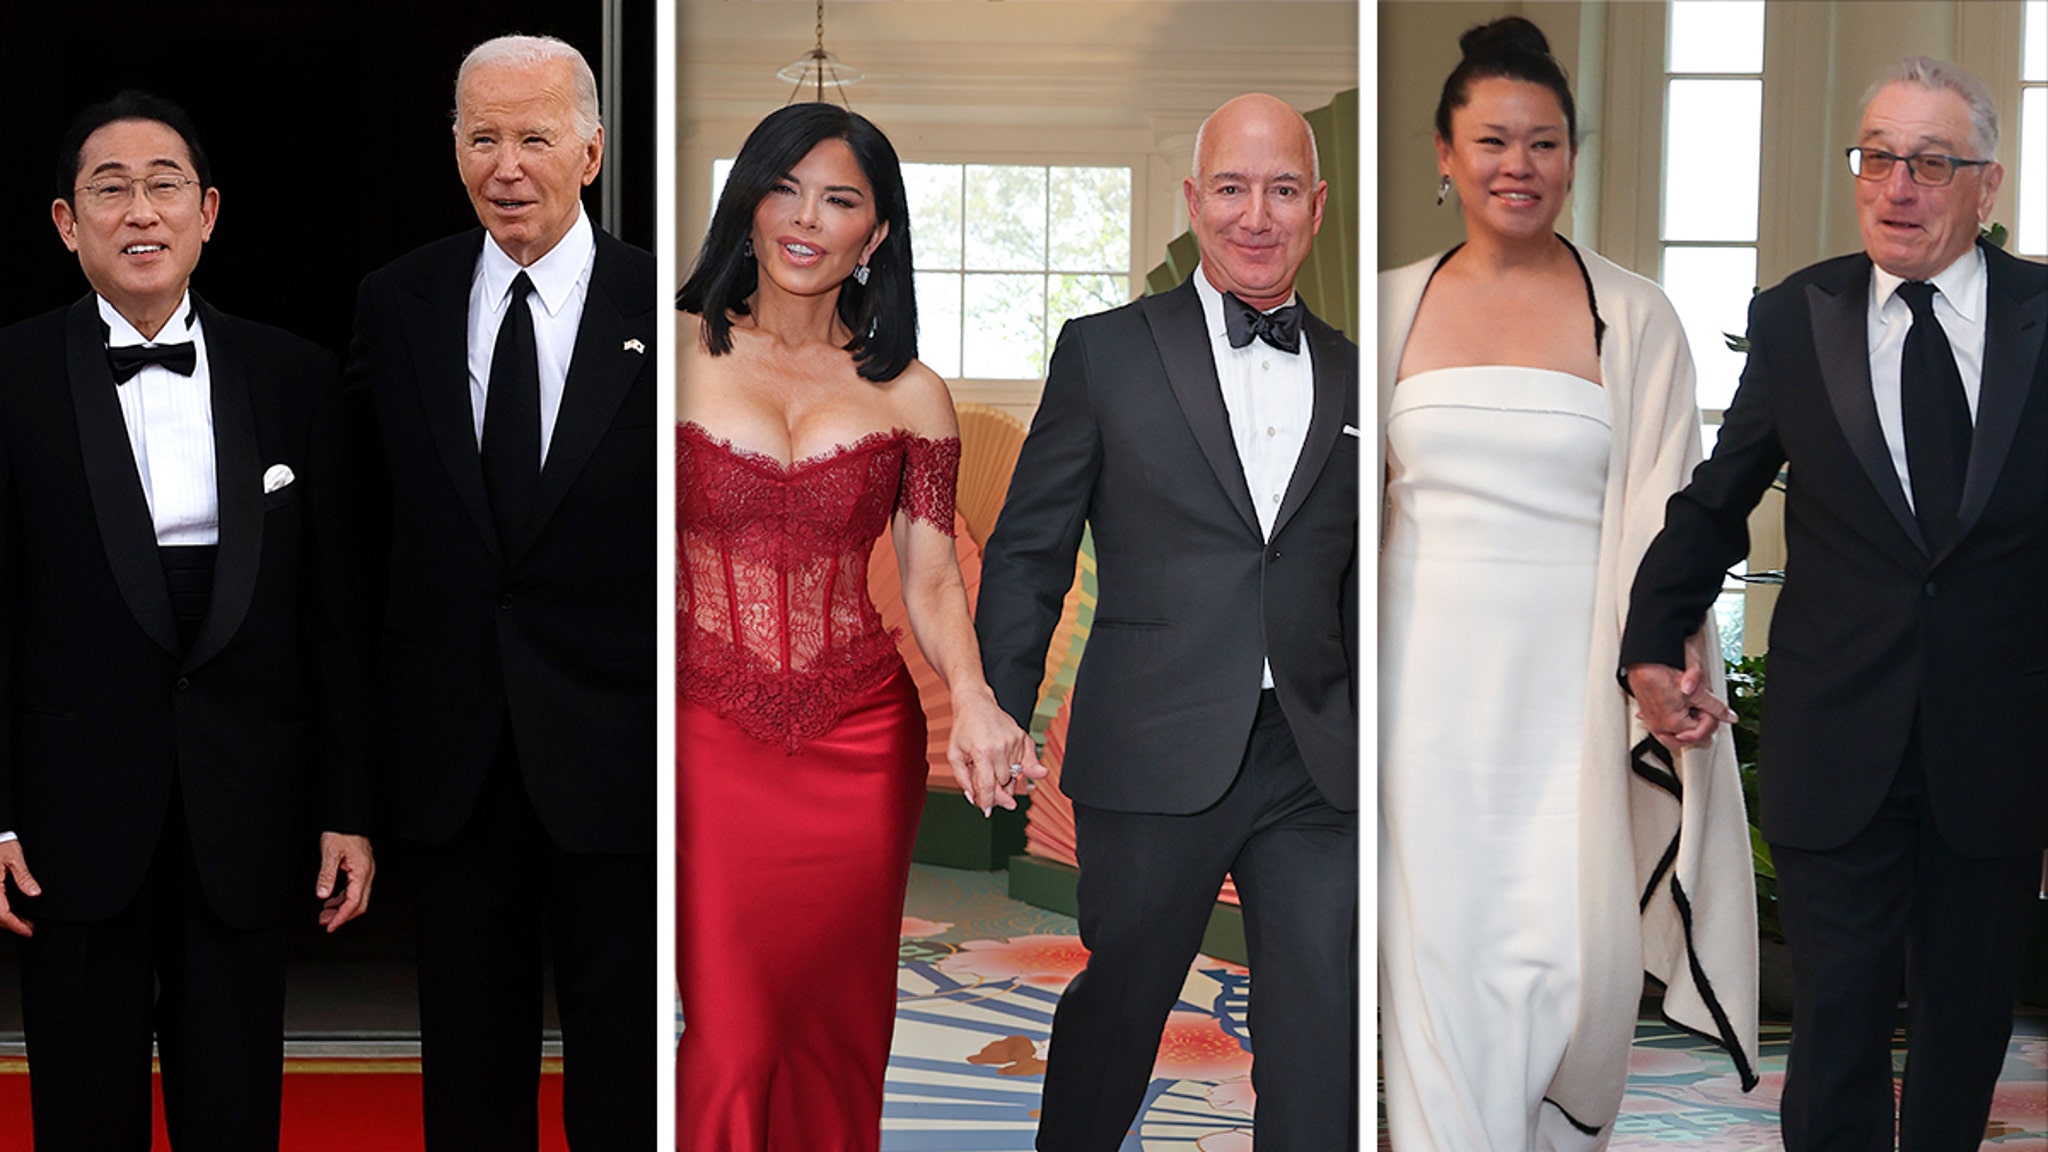 Lavish State Dinner at White House Welcomes Wealthy, Influential, and Glamorous Guests